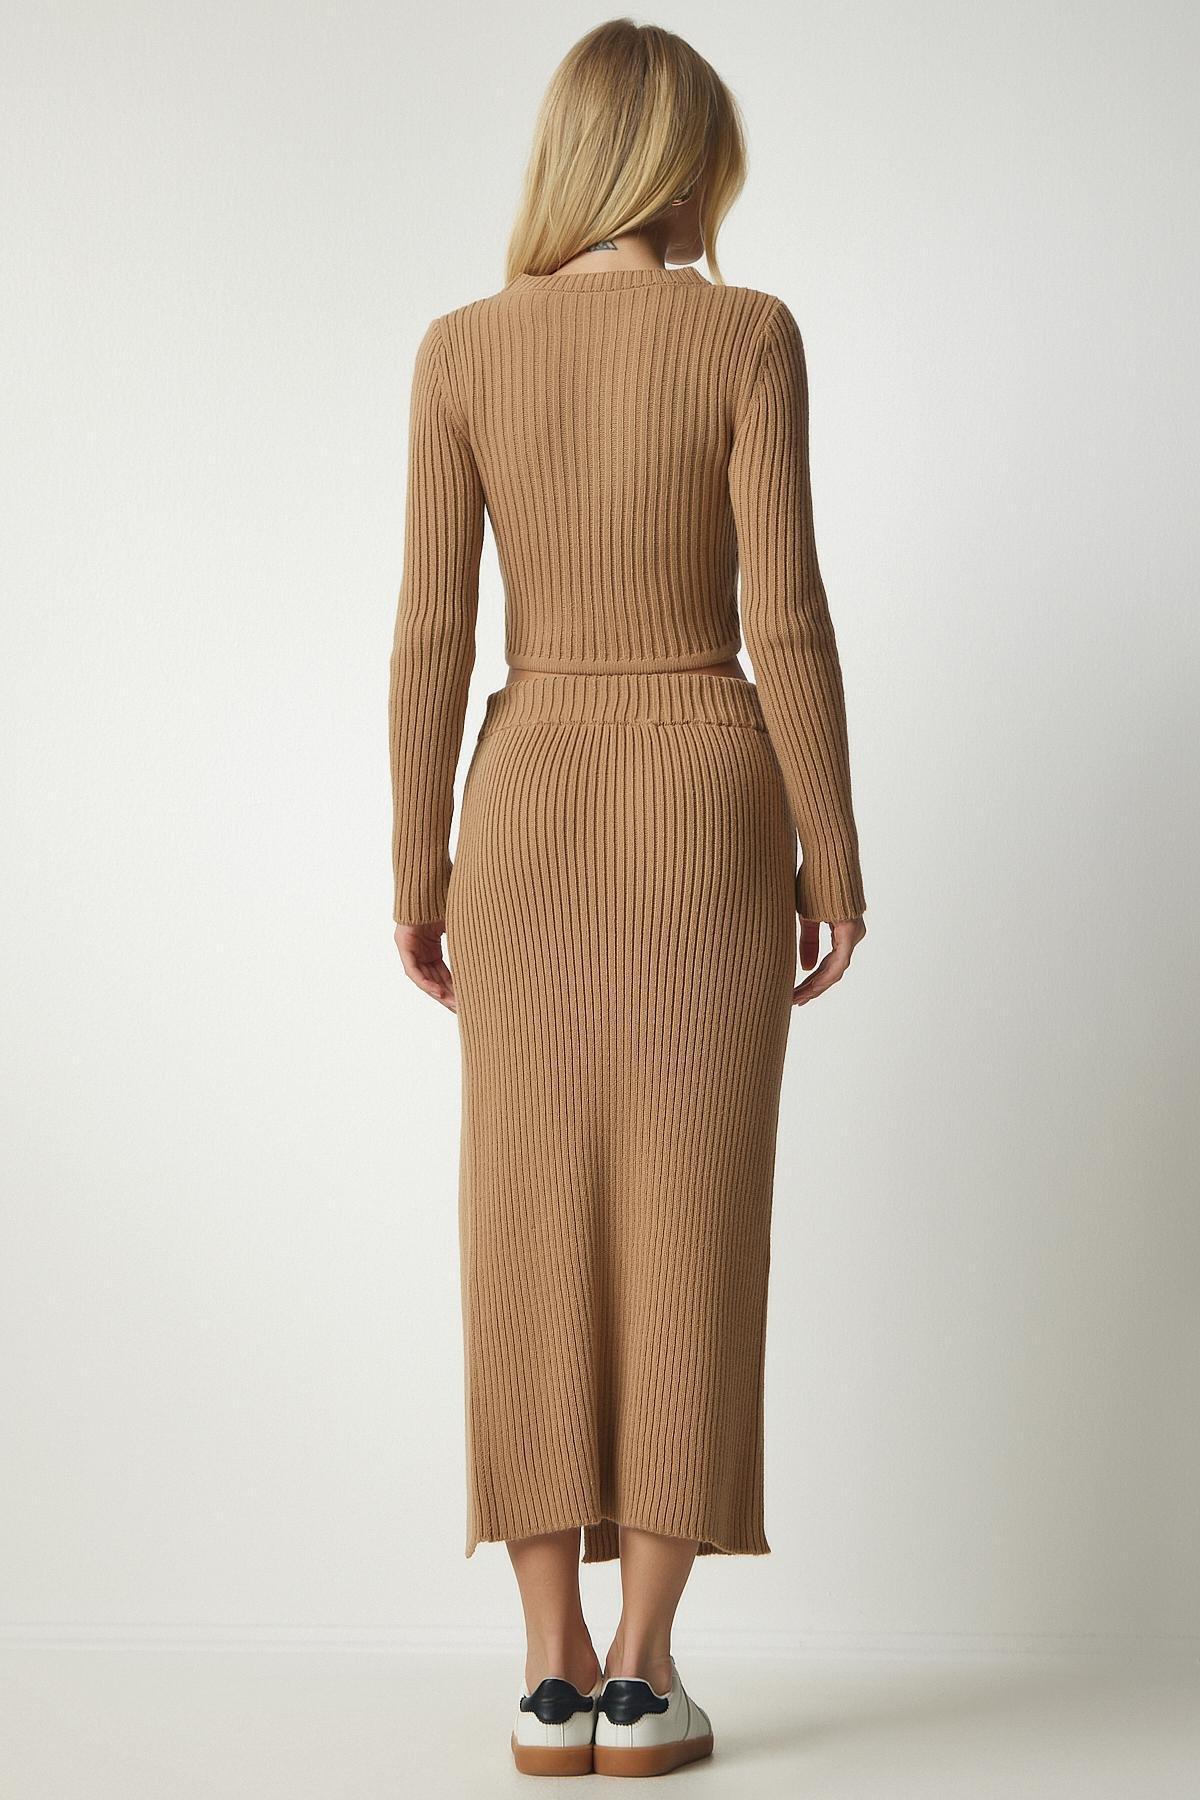 Happiness Istanbul - Beige Ribbed Co-Ord Set